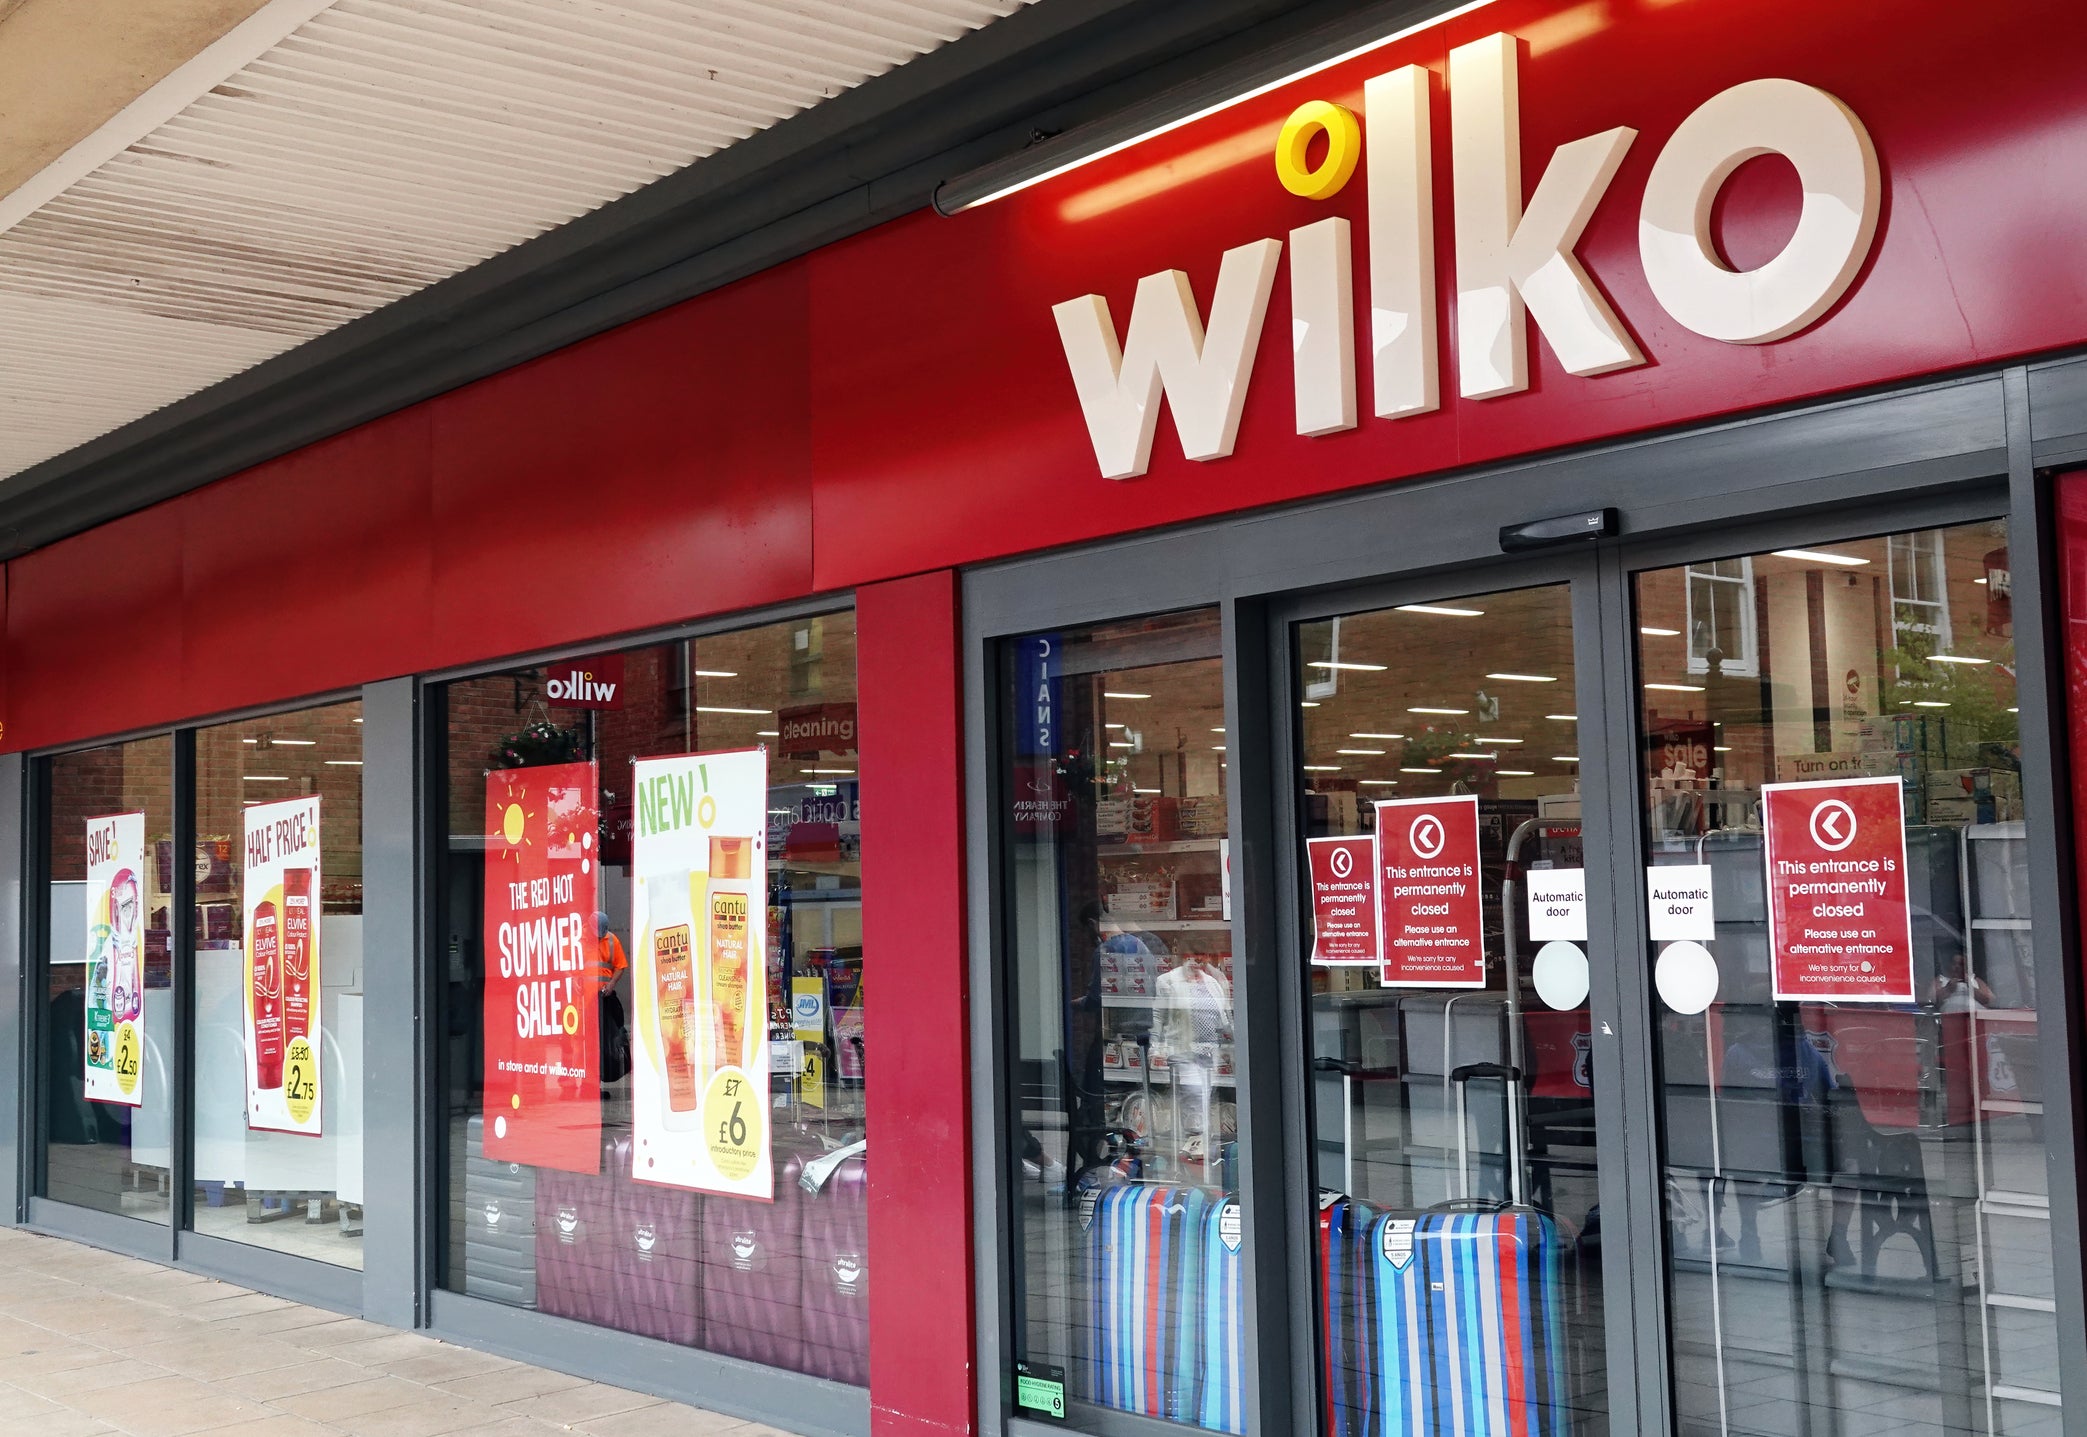 Wilko started as a hardware shop in Leicester